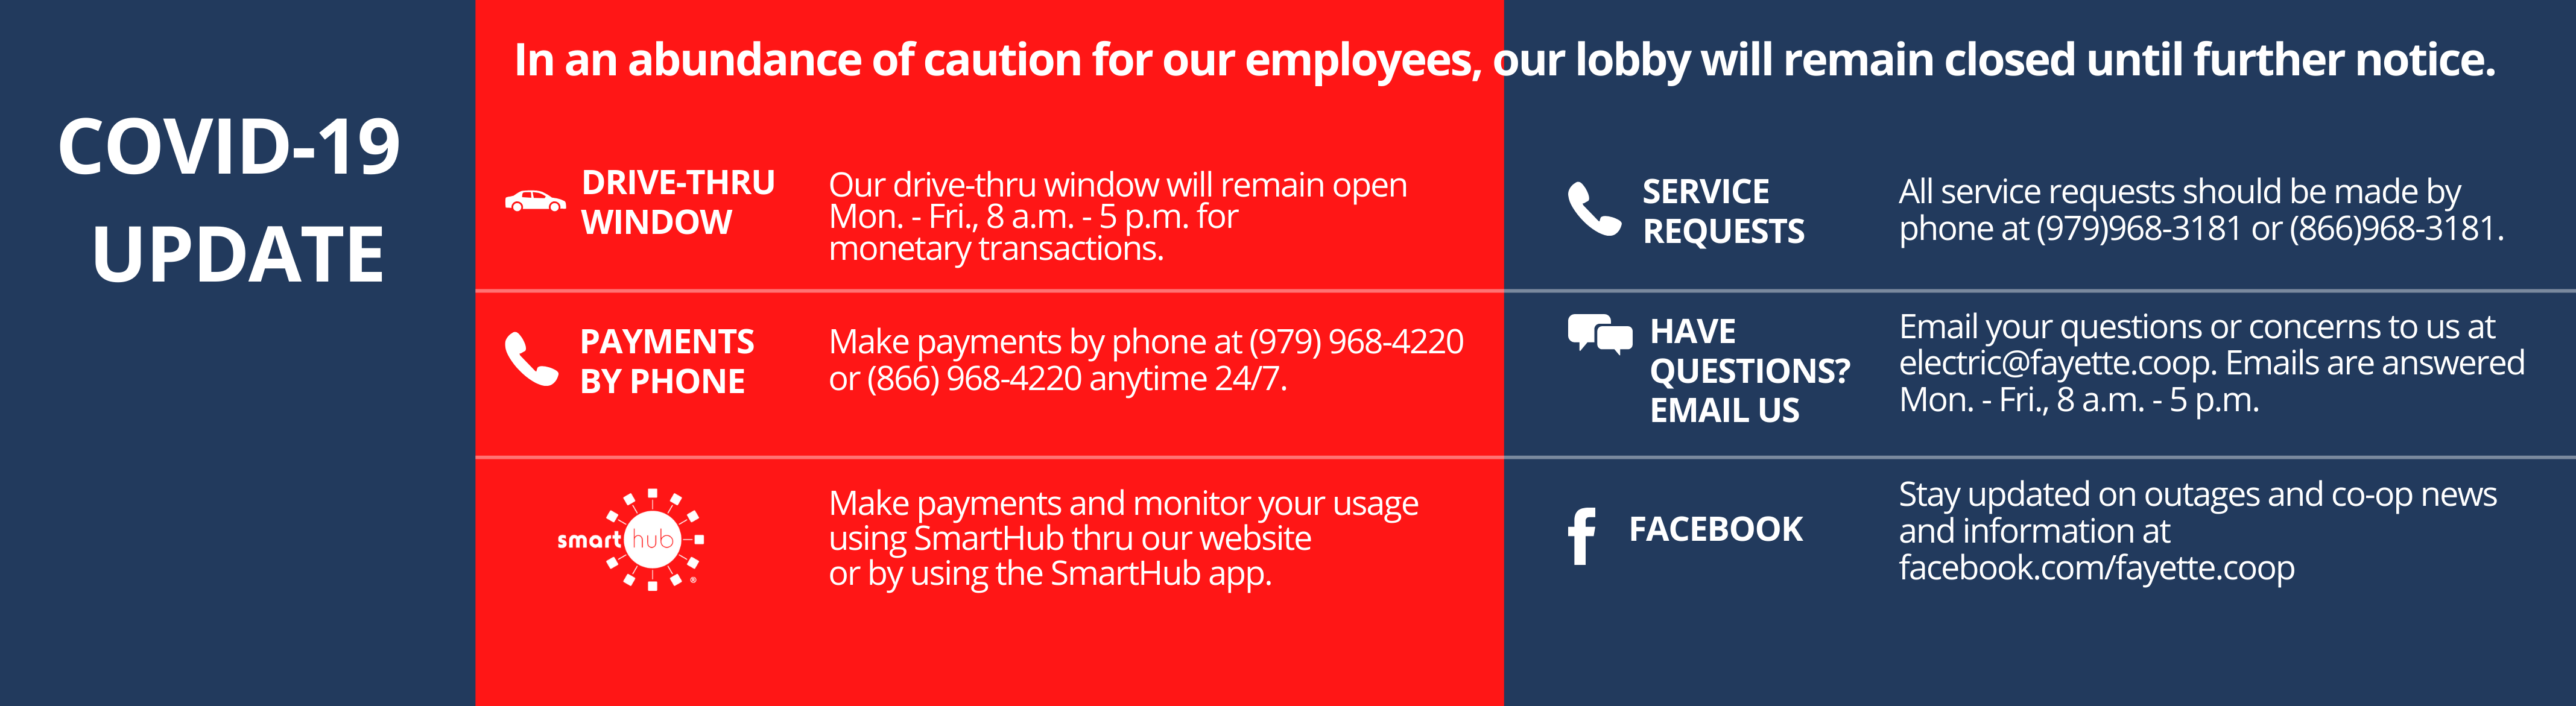 In an abundance of caution for our employees, our lobby will remain closed until further notice.